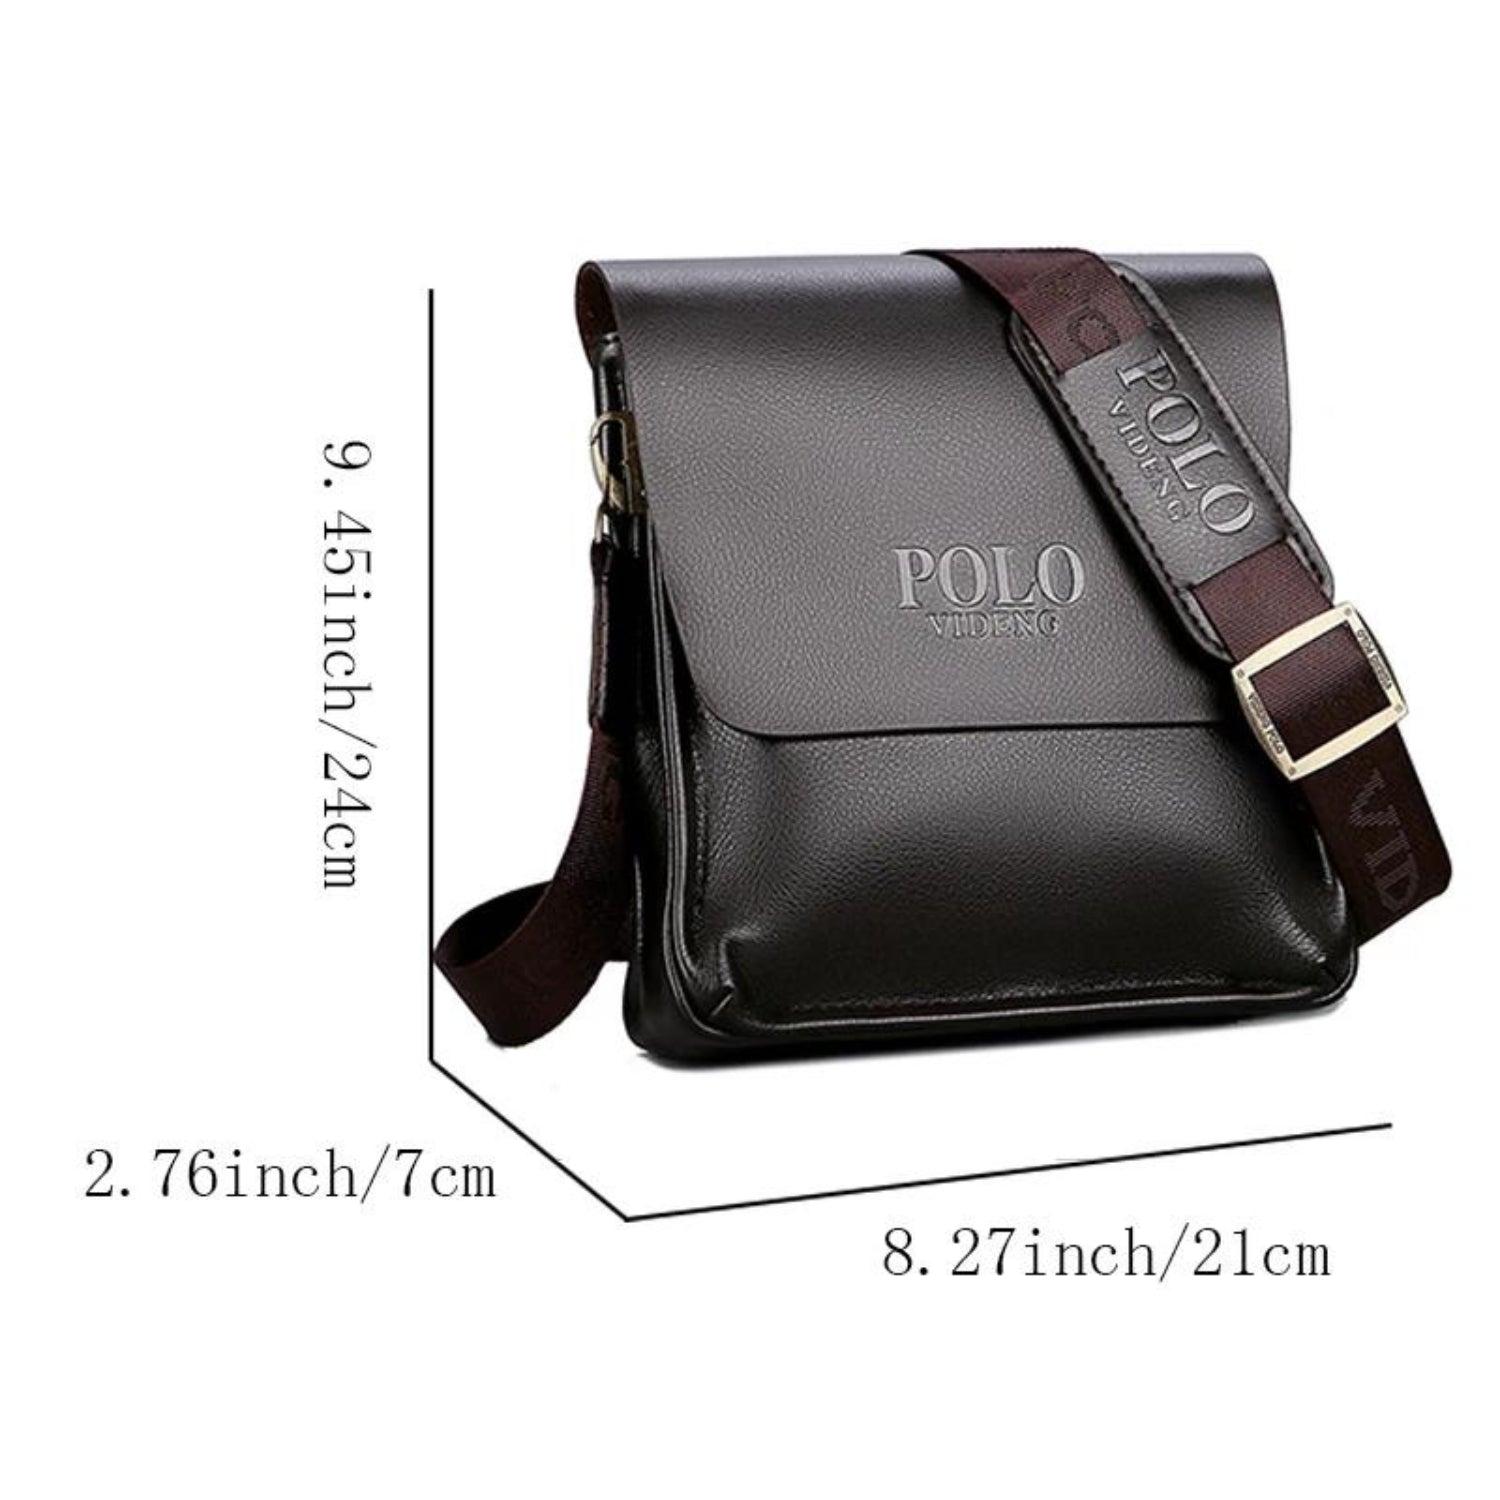 Classic Black Polo-Inspired Shoulder Bag – Timeless Style Statement